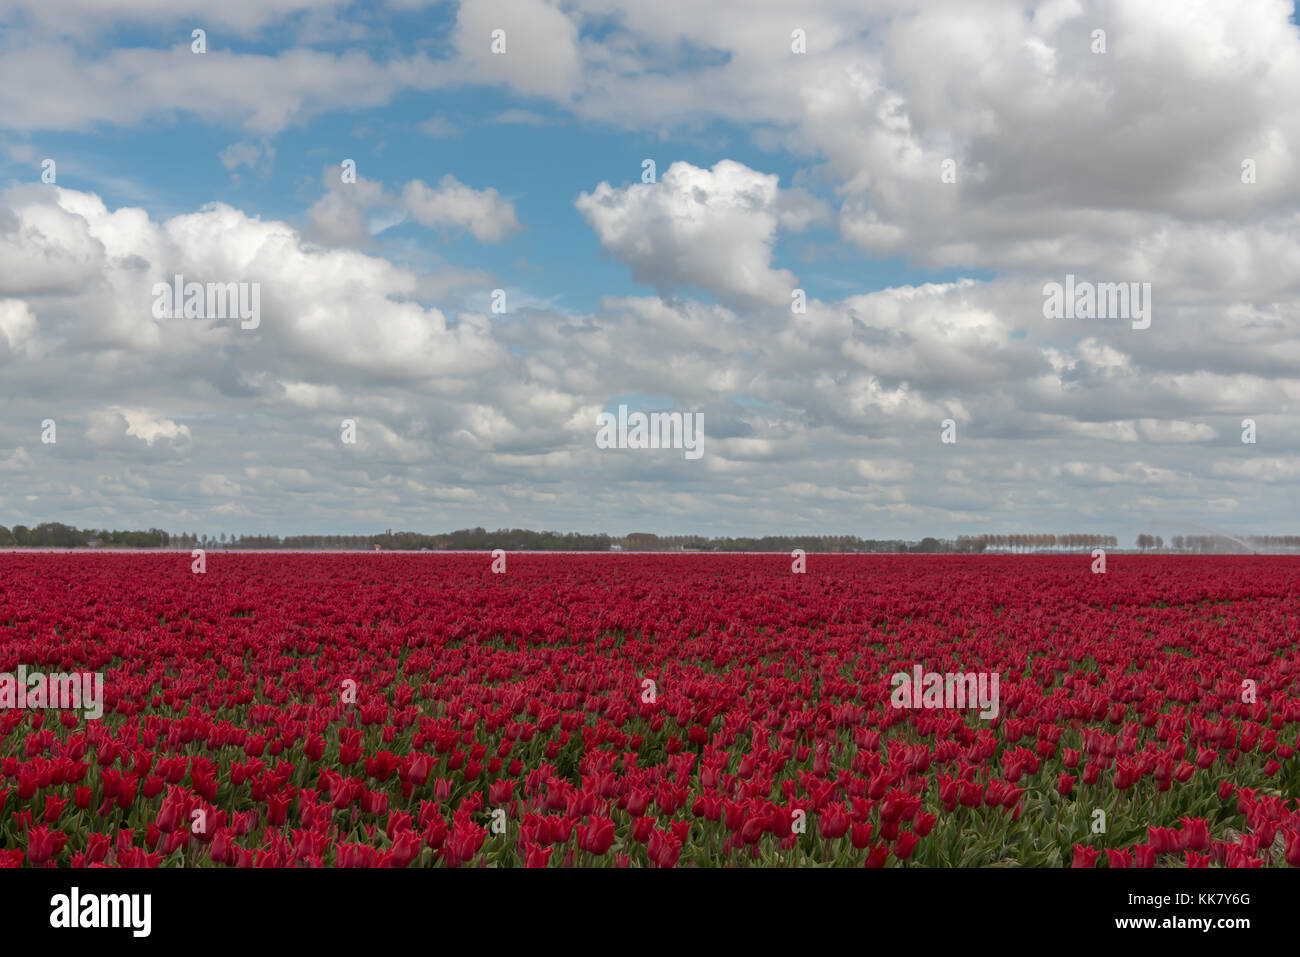 Dutch bulb field with red tulips and a cloudy sky Stock Photo